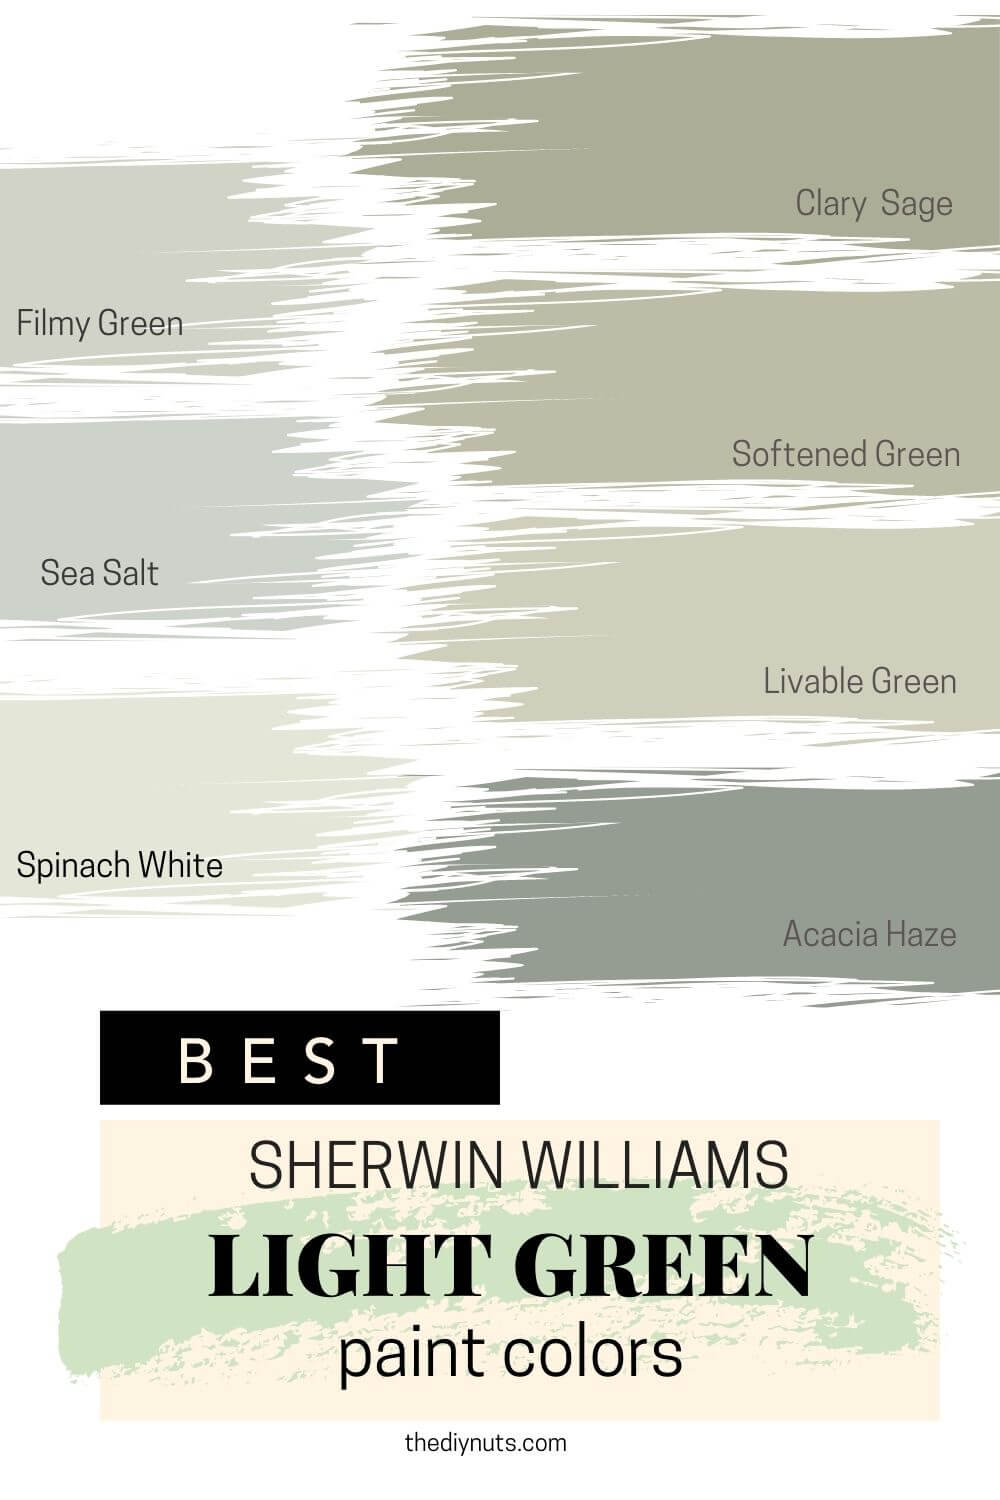 Sherwin Williams Light Green Paint Colors with variety of greens with names